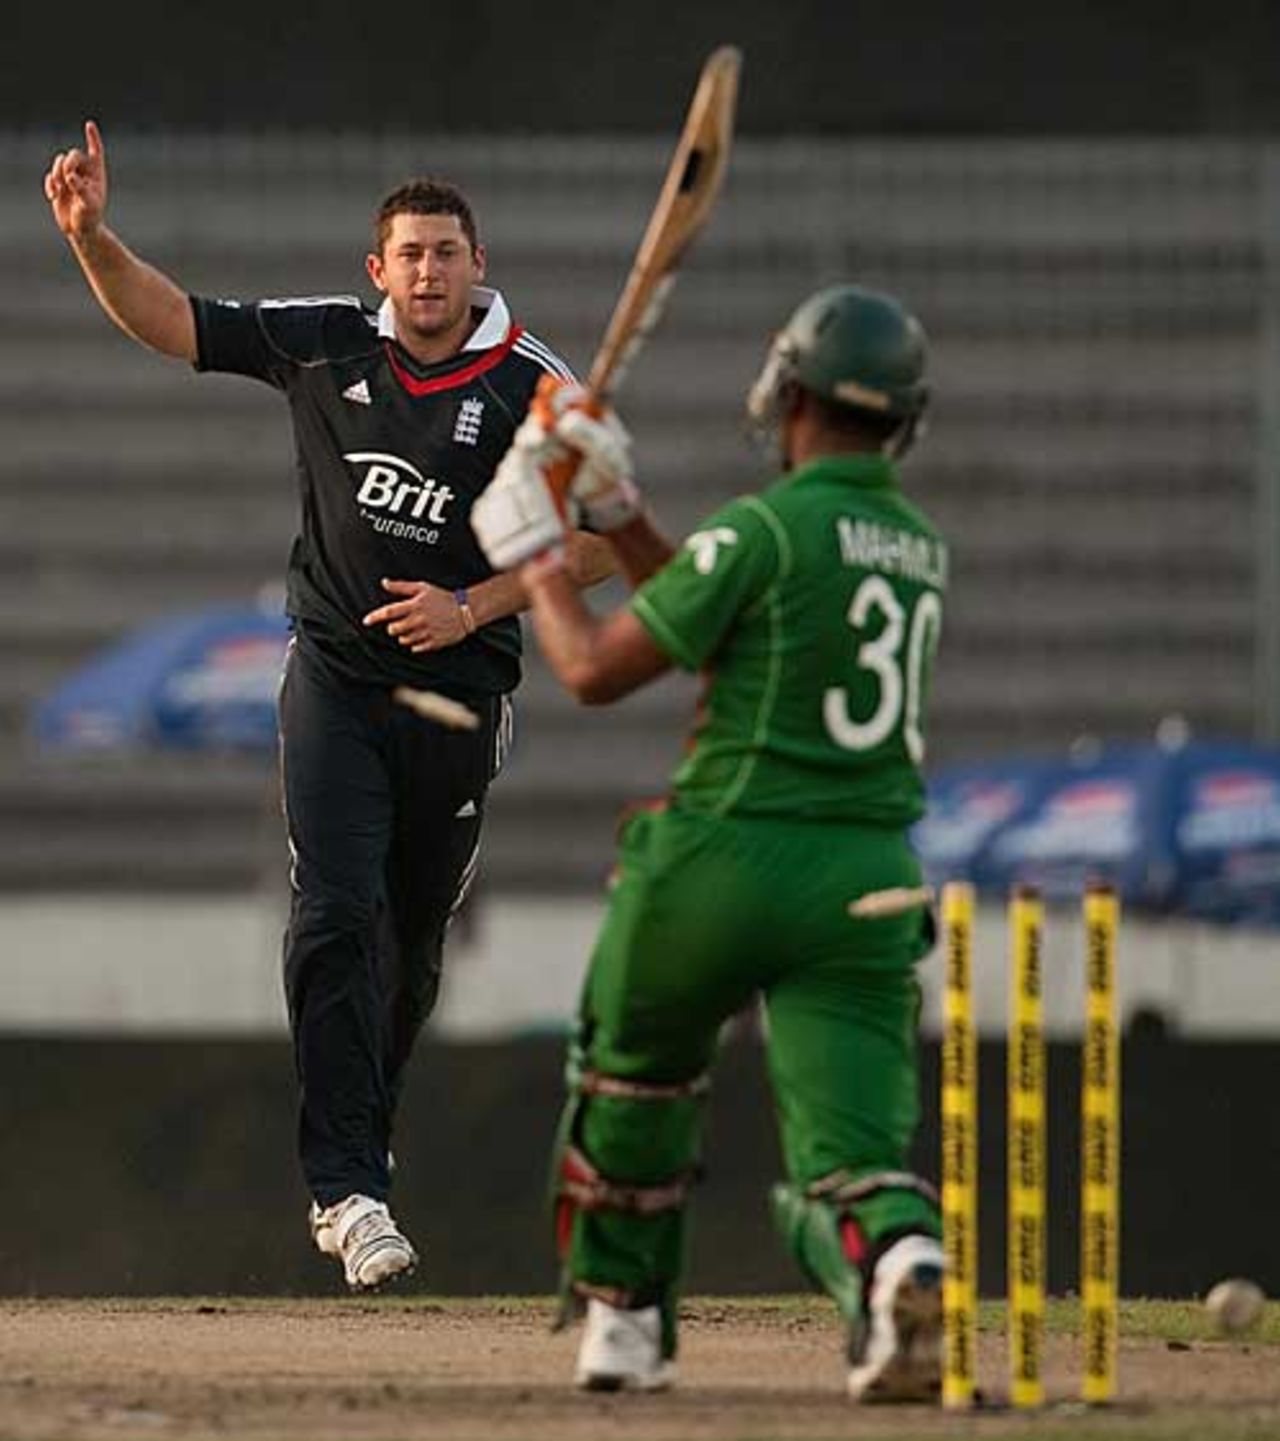 Tim Bresnan was the pick of England's attack with 3 for 51, Bangladesh v England, 2nd ODI, Dhaka, March 2, 2010